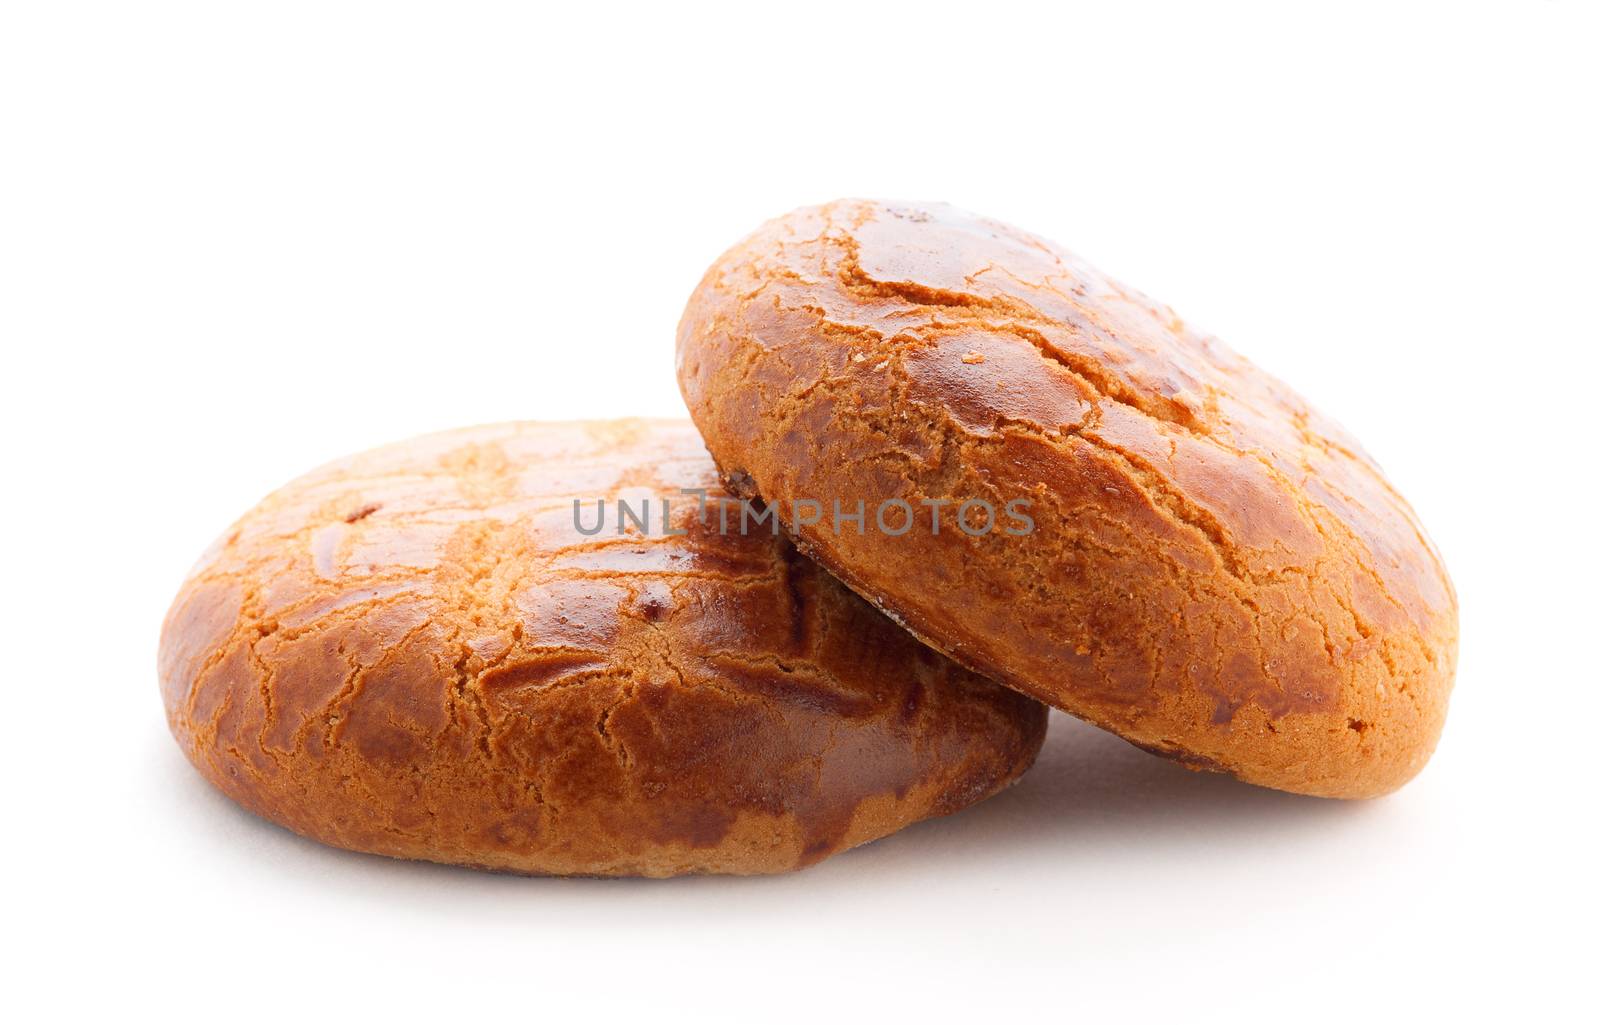 Two Biscuit Cookies Isolated On White Background